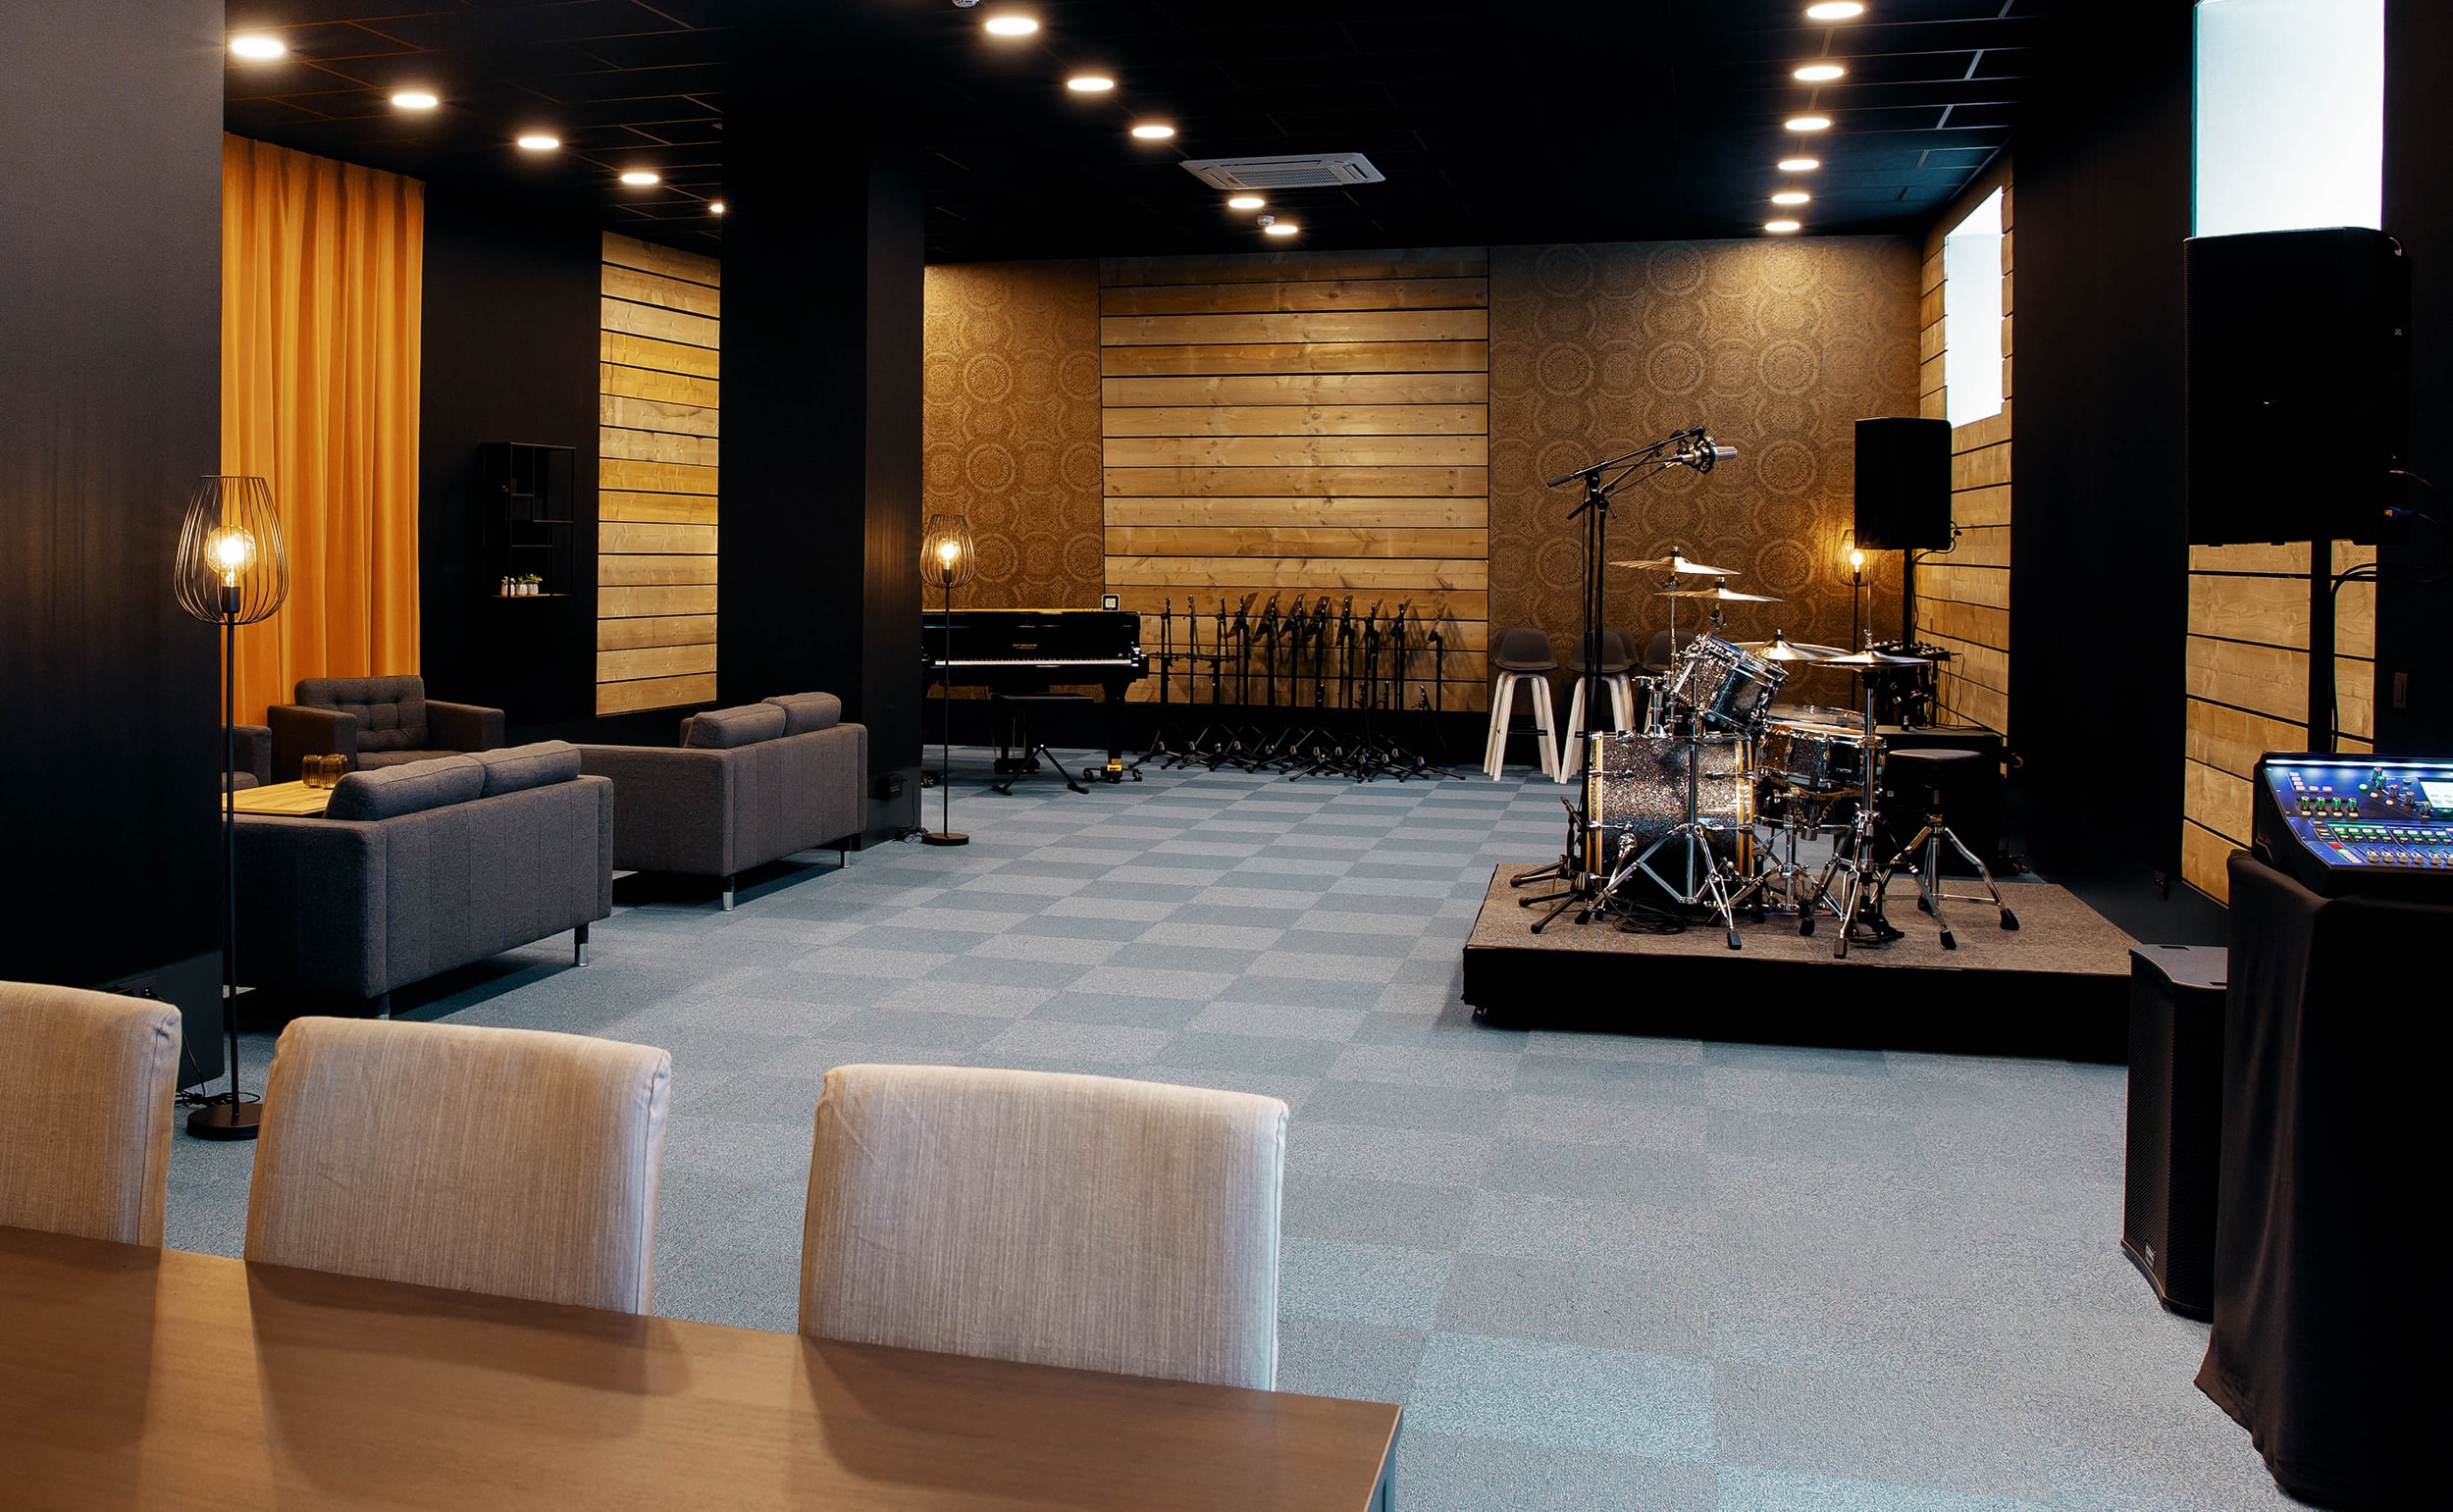 Allen & Heath Is The Primary Choice For Brand New High-End Rehearsal Studios Near Brussels 4